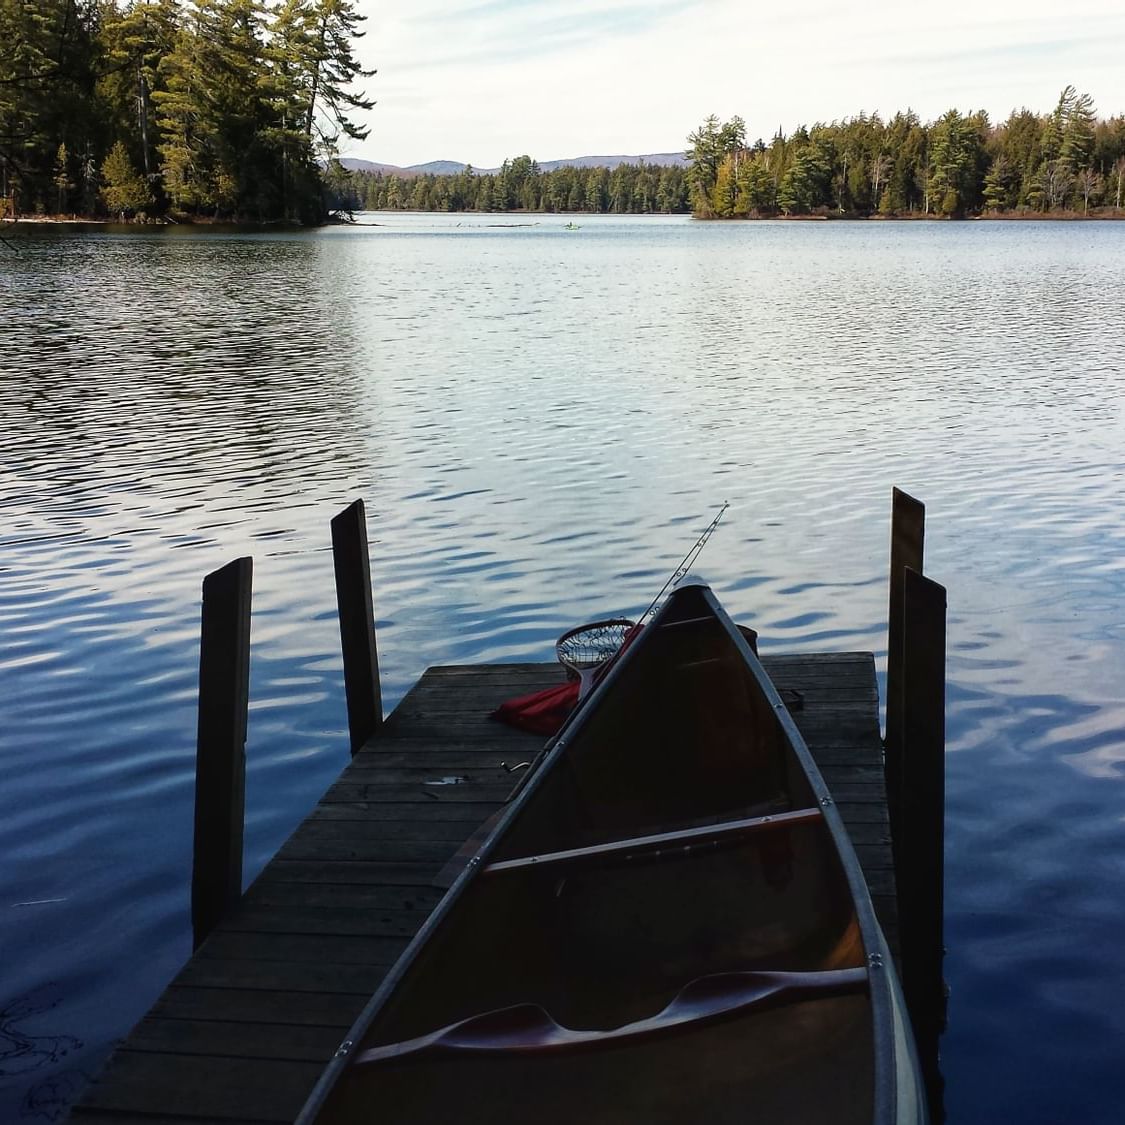 A canoe by a boat dock at Horseshoe Pond near High Peaks Resort